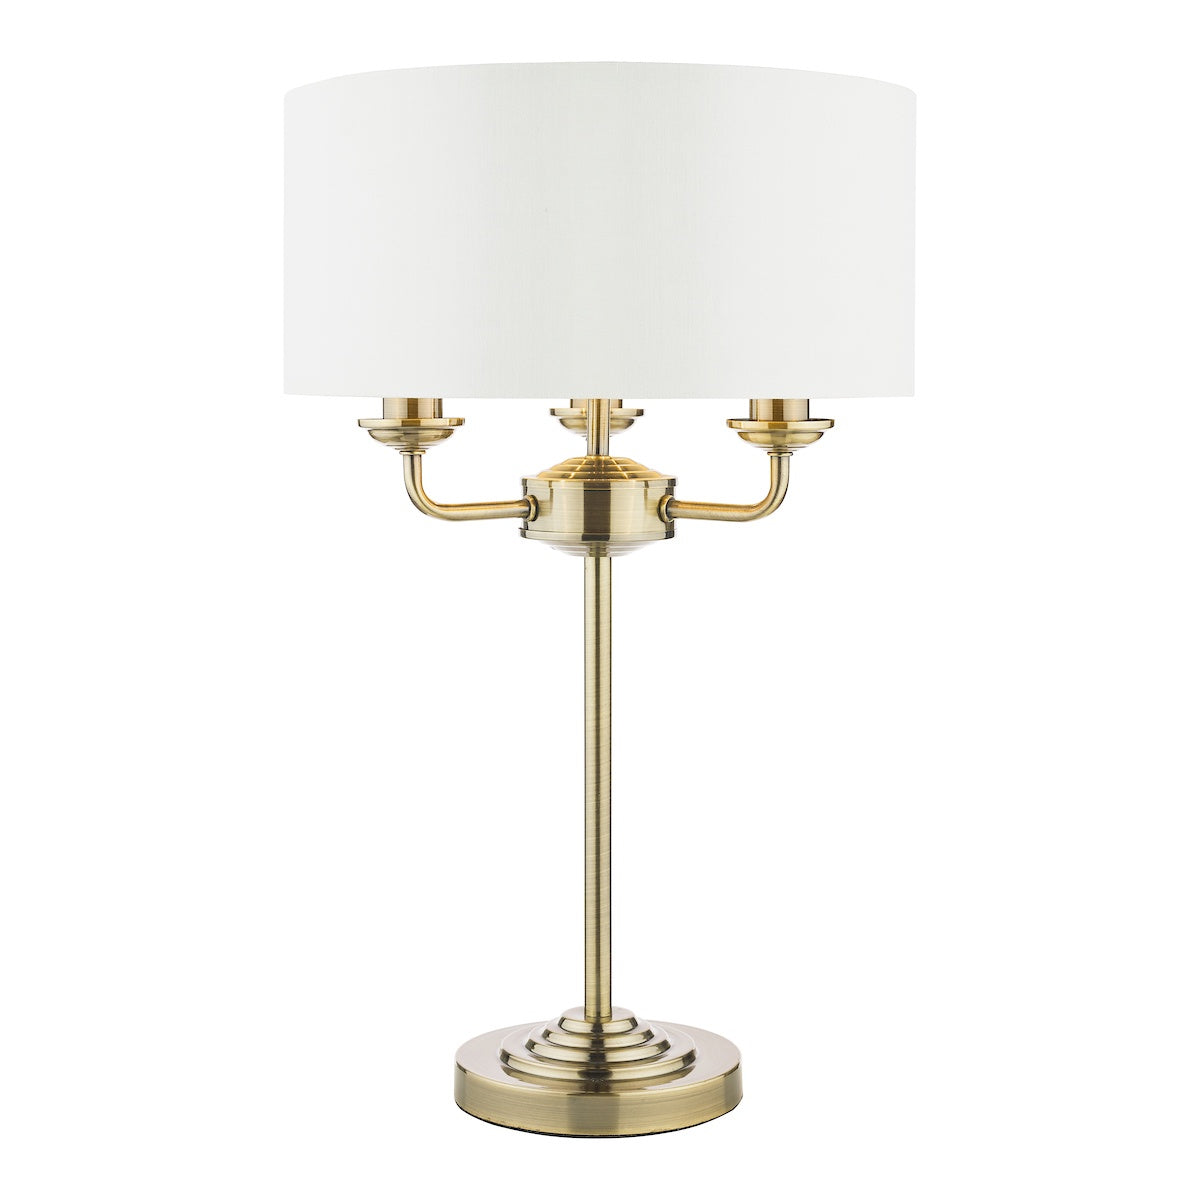 Laura Ashley Sorrento Antique Brass 3 Light LA3655967-Q Table Lamp with Ivory Shade